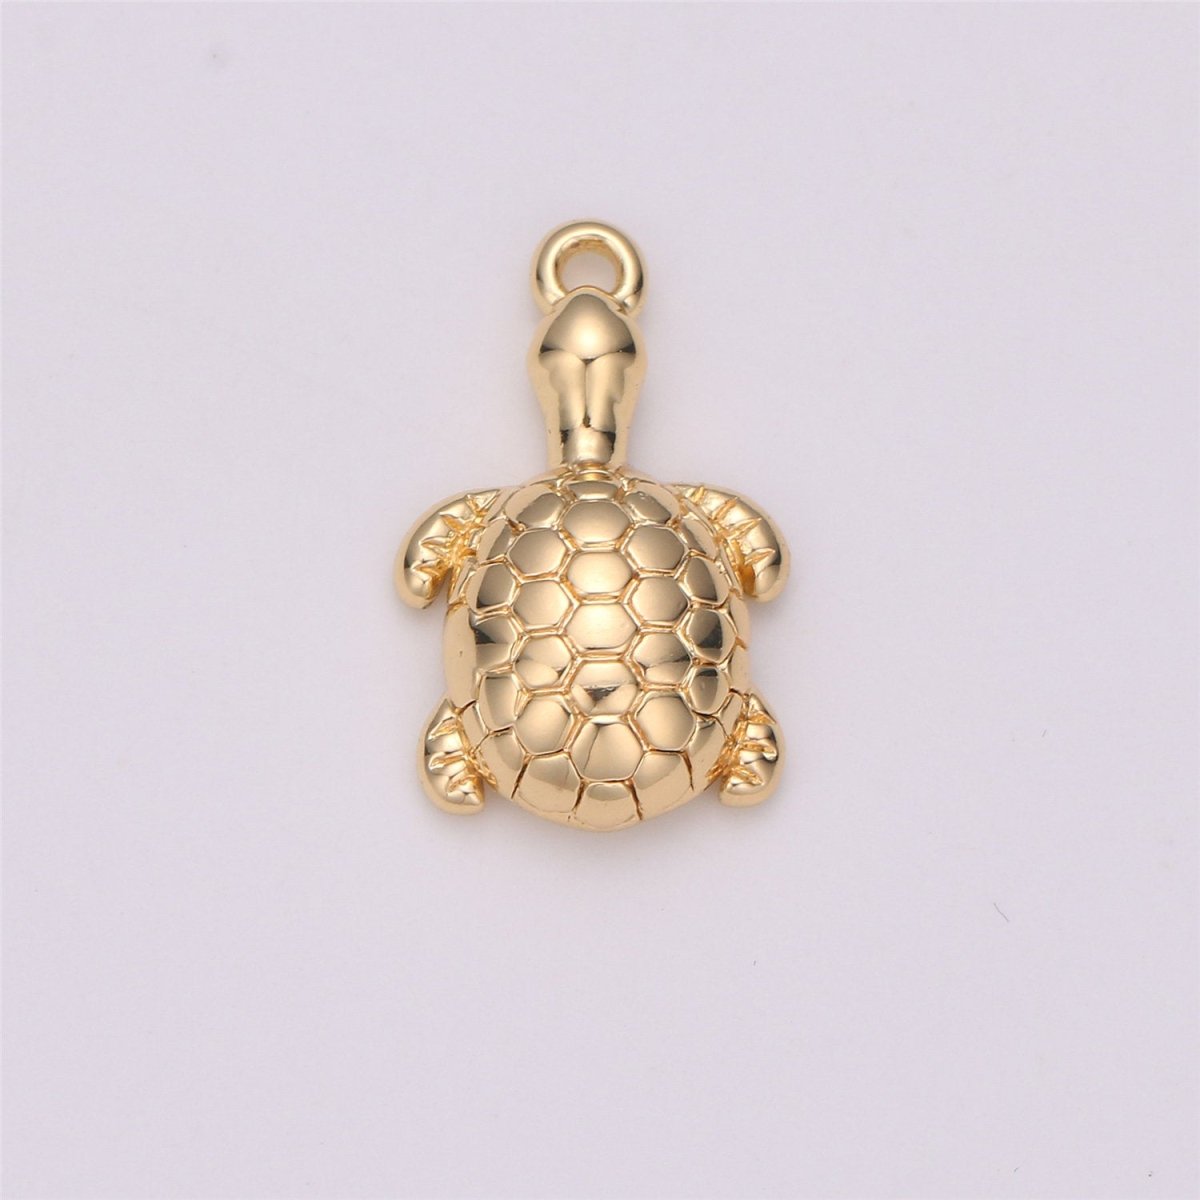 Small Sea Turtle Charm Ocean Summer Vacation Animal Pendant in Gold Filled Turtoise Pendants Necklace Earring Bracelet Charms C-531 - DLUXCA